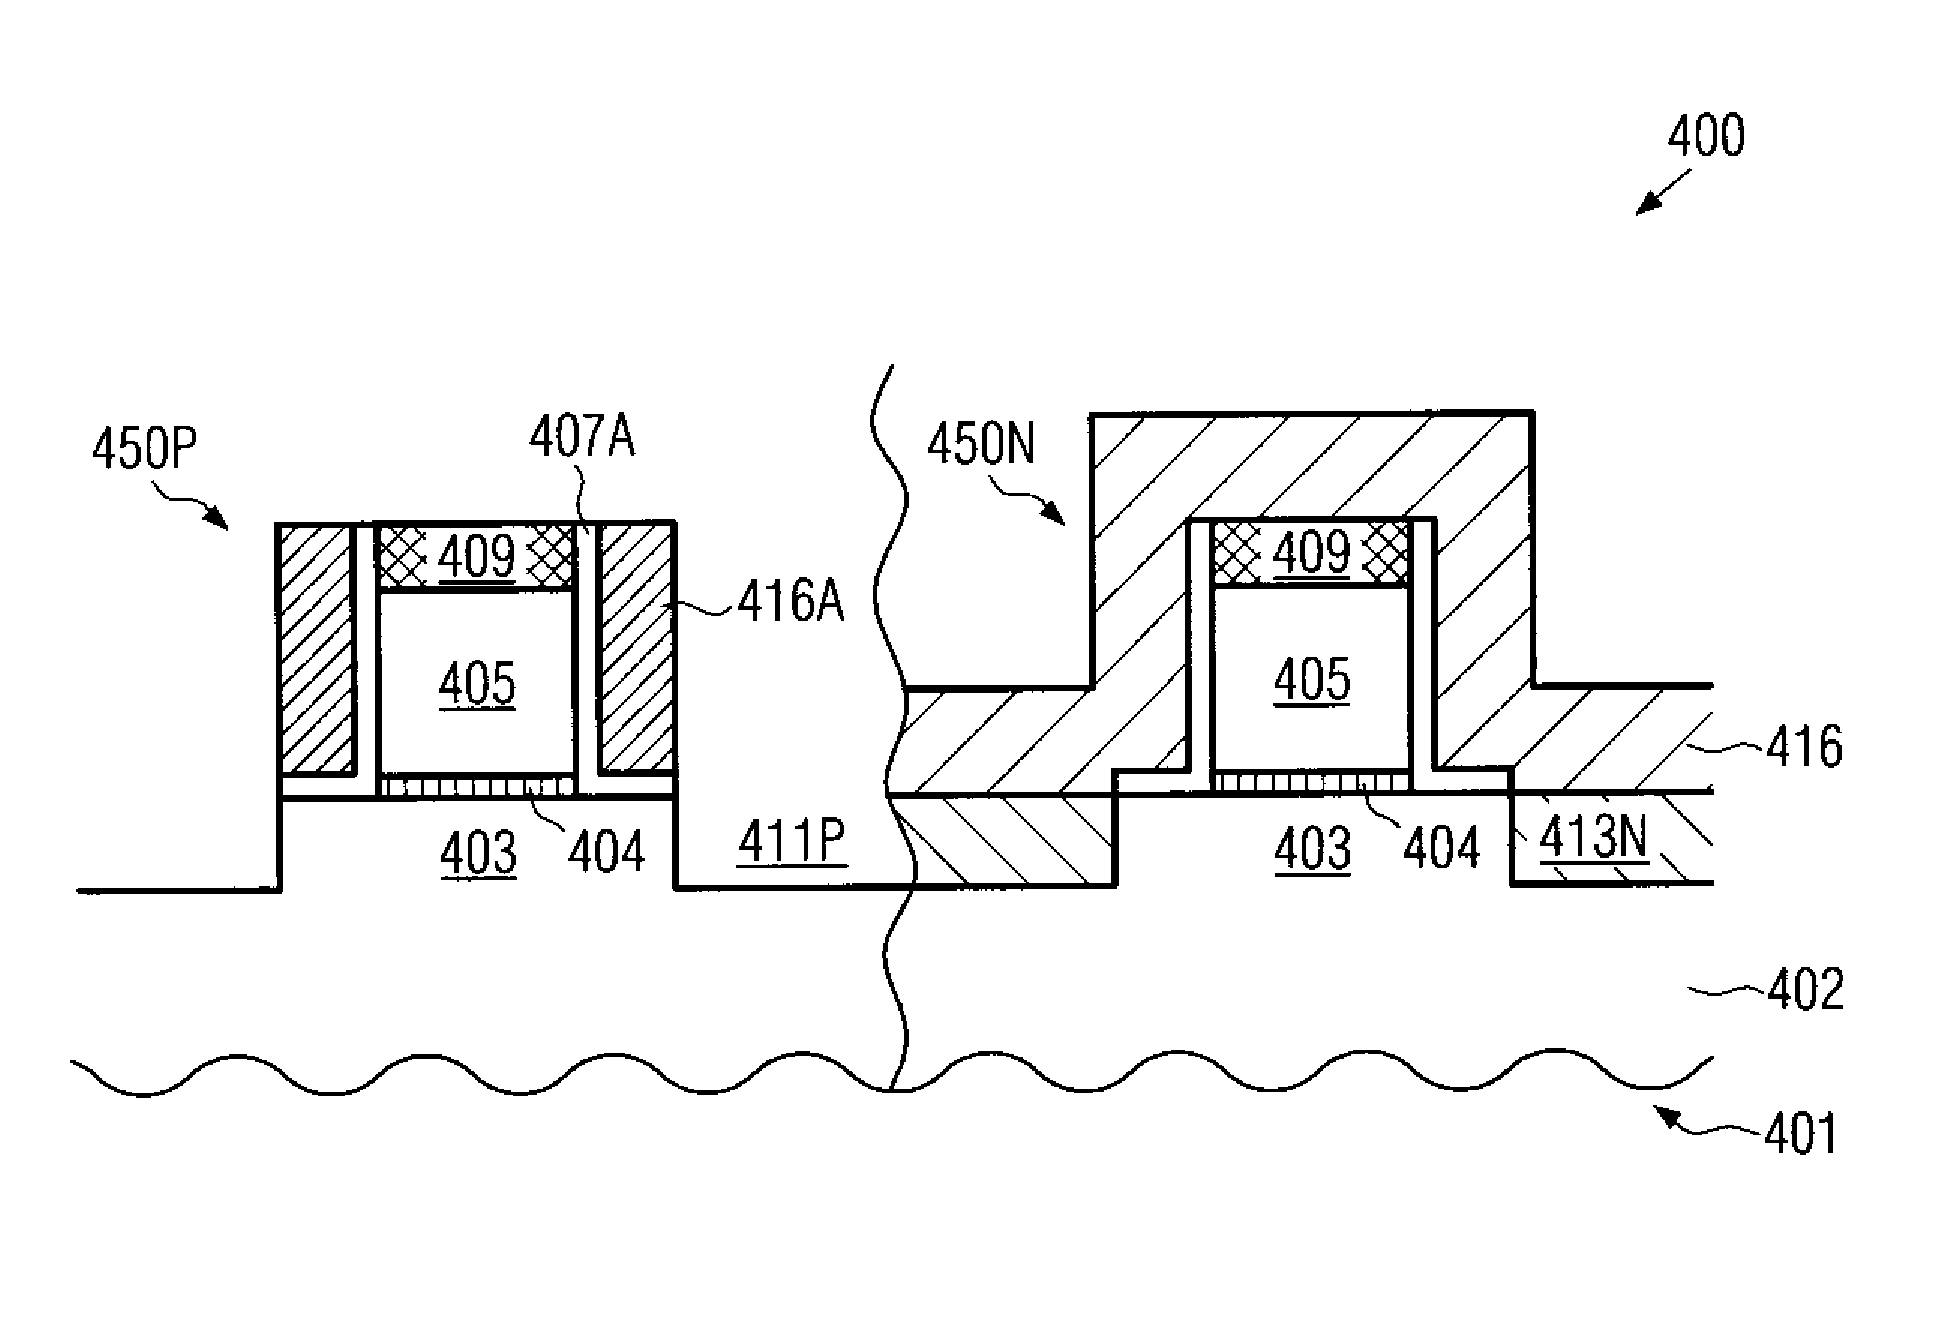 Method for forming embedded strained drain/source regions based on a combined spacer and cavity etch process